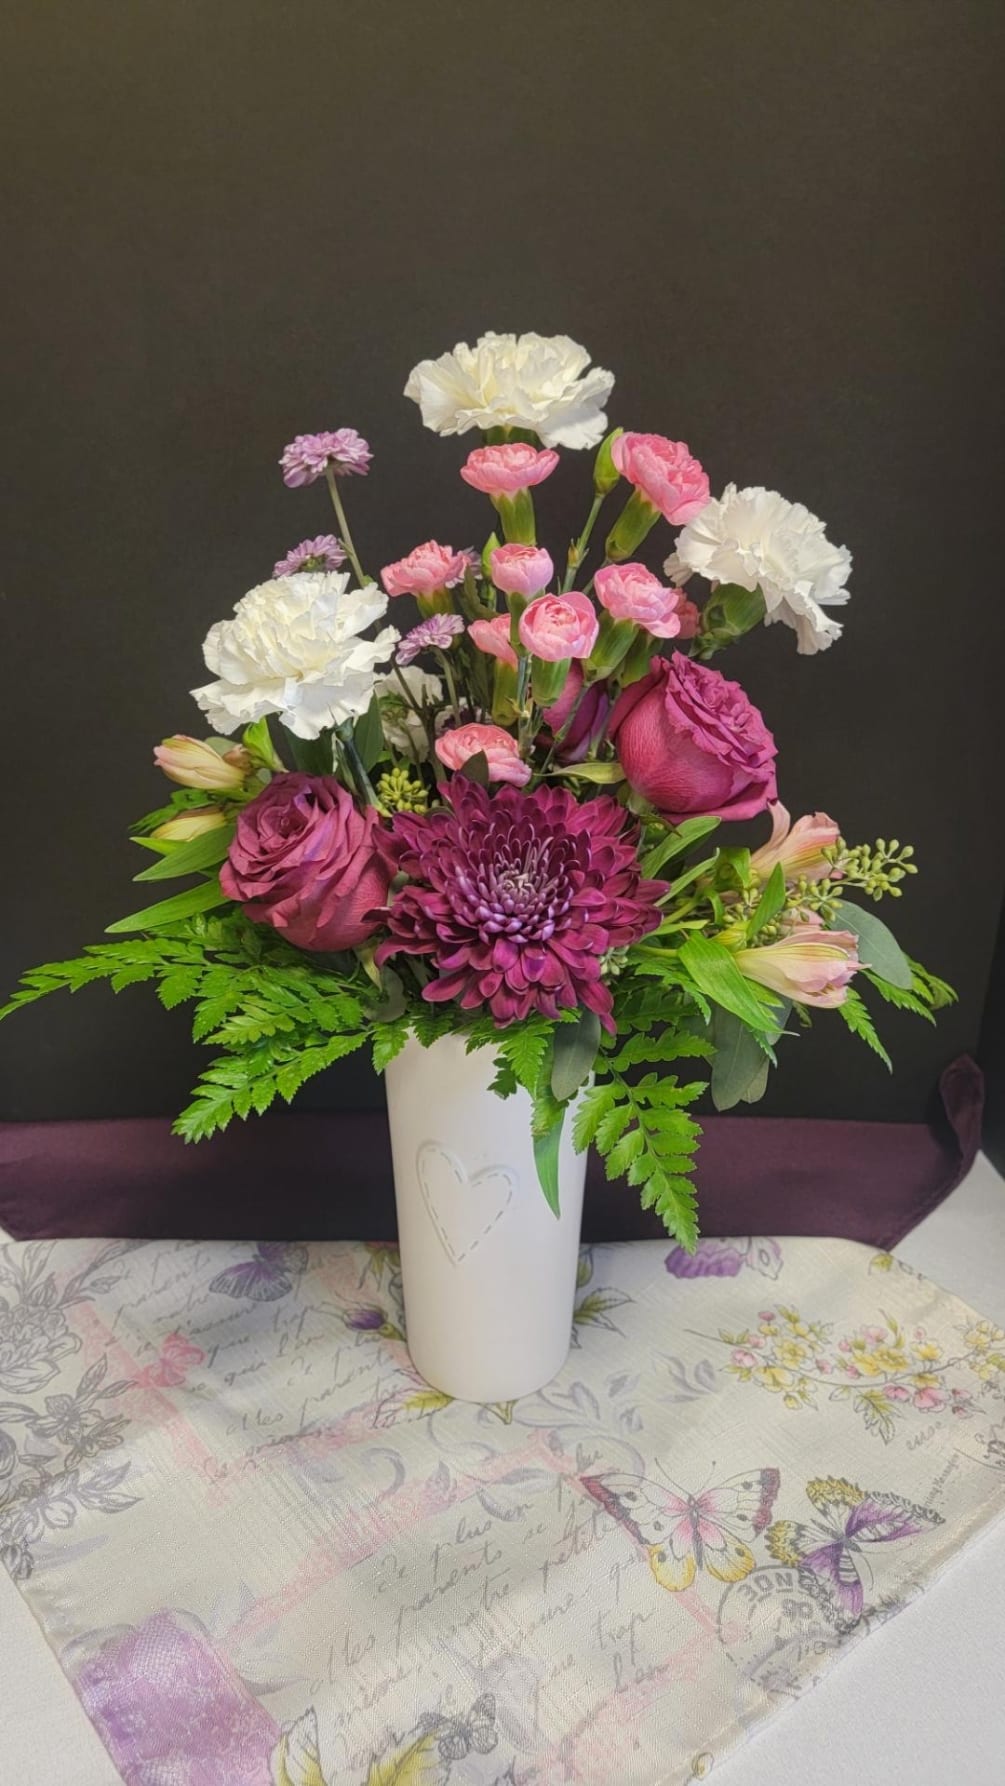 Mix arrangement in a heart white vase, white carnations, blueberry pink roses